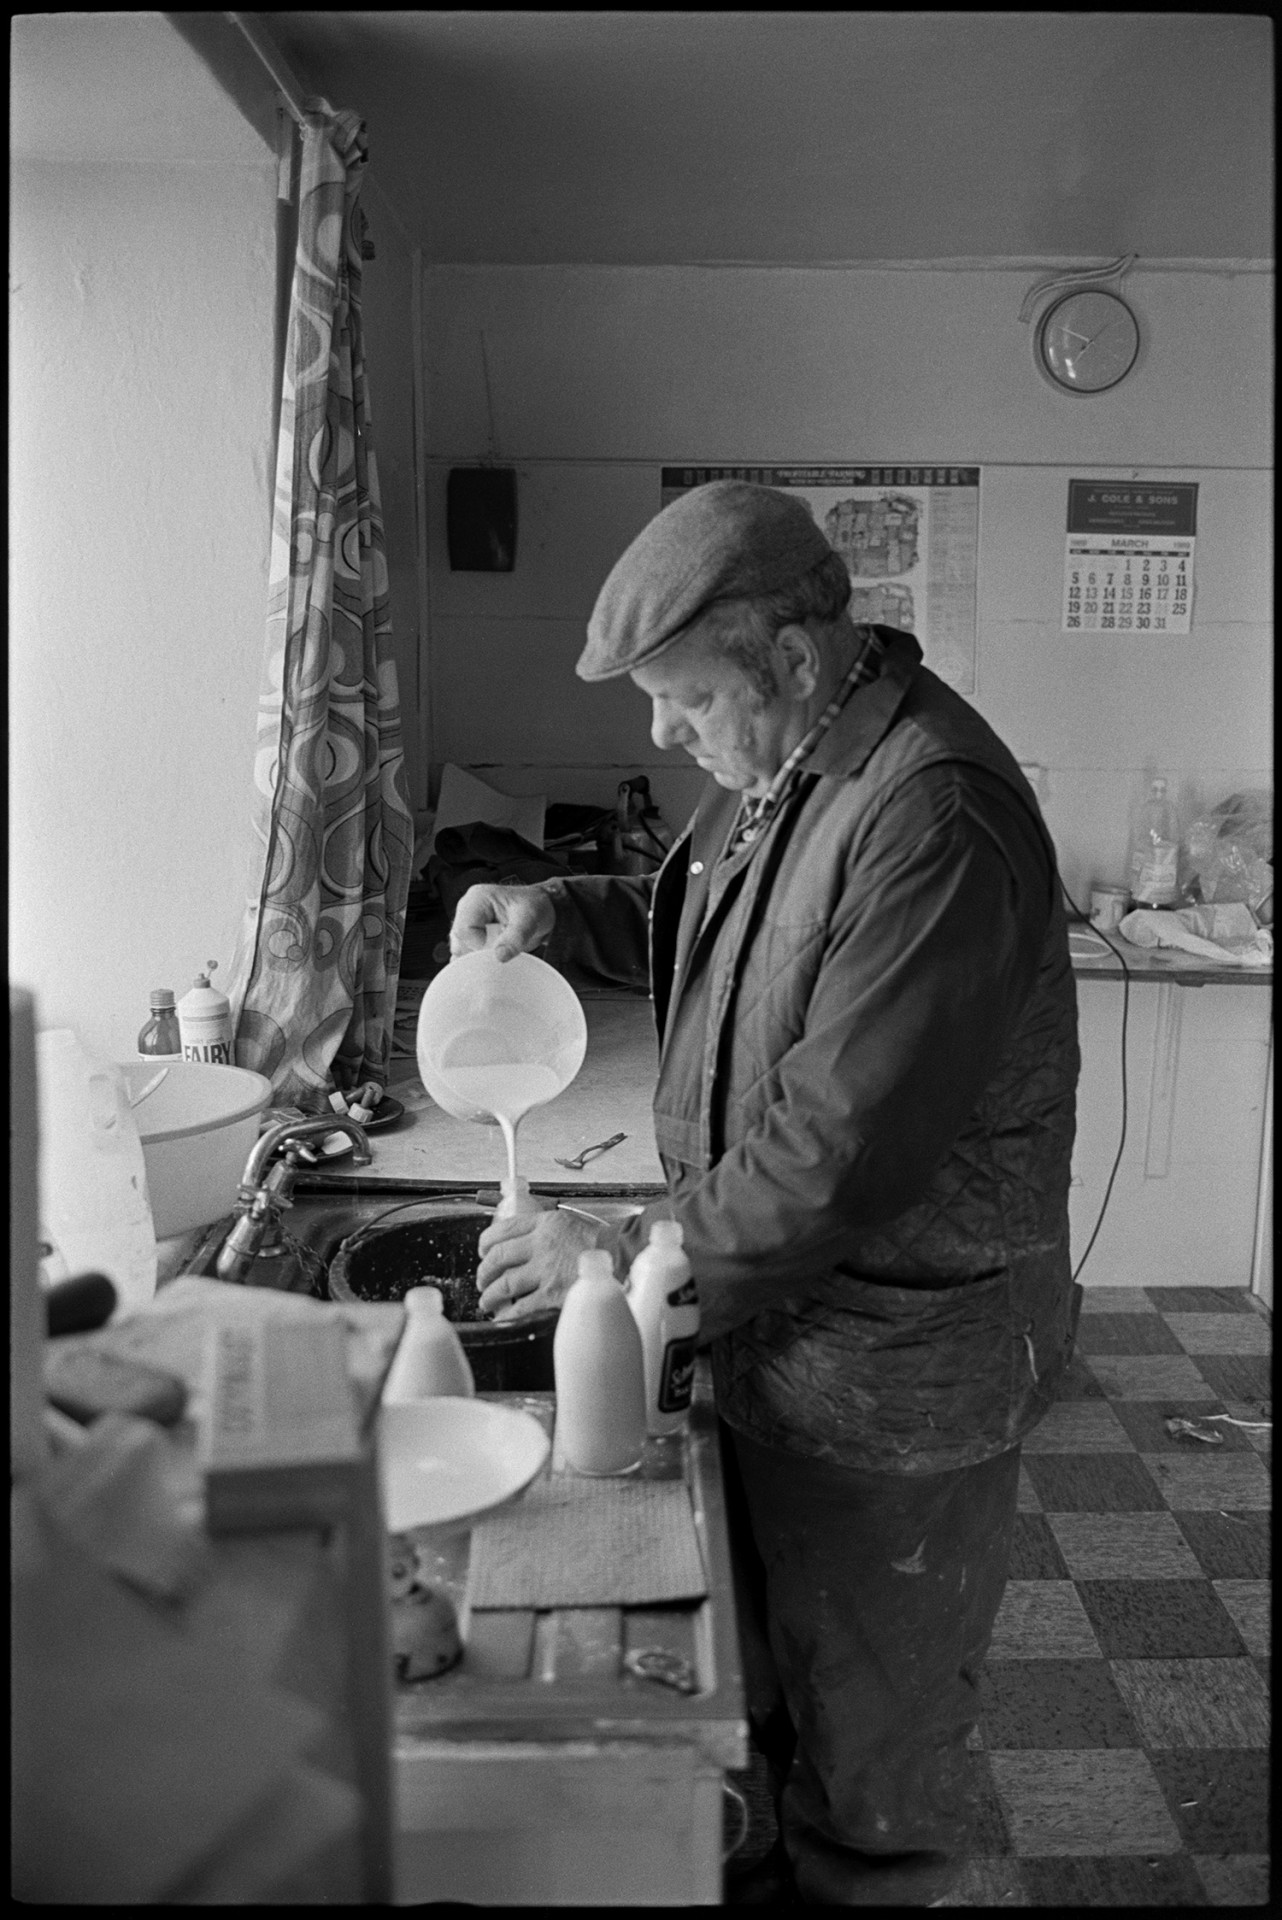 Shepherd feeding lambs beside cob and thatch farmhouse, mixing feed in kitchen.
[John Moyes in the kitchen of Brookland Farm, Chulmleigh filling bottles with milk to feed lambs. Full bottles can be seen on the draining board of the sink.]